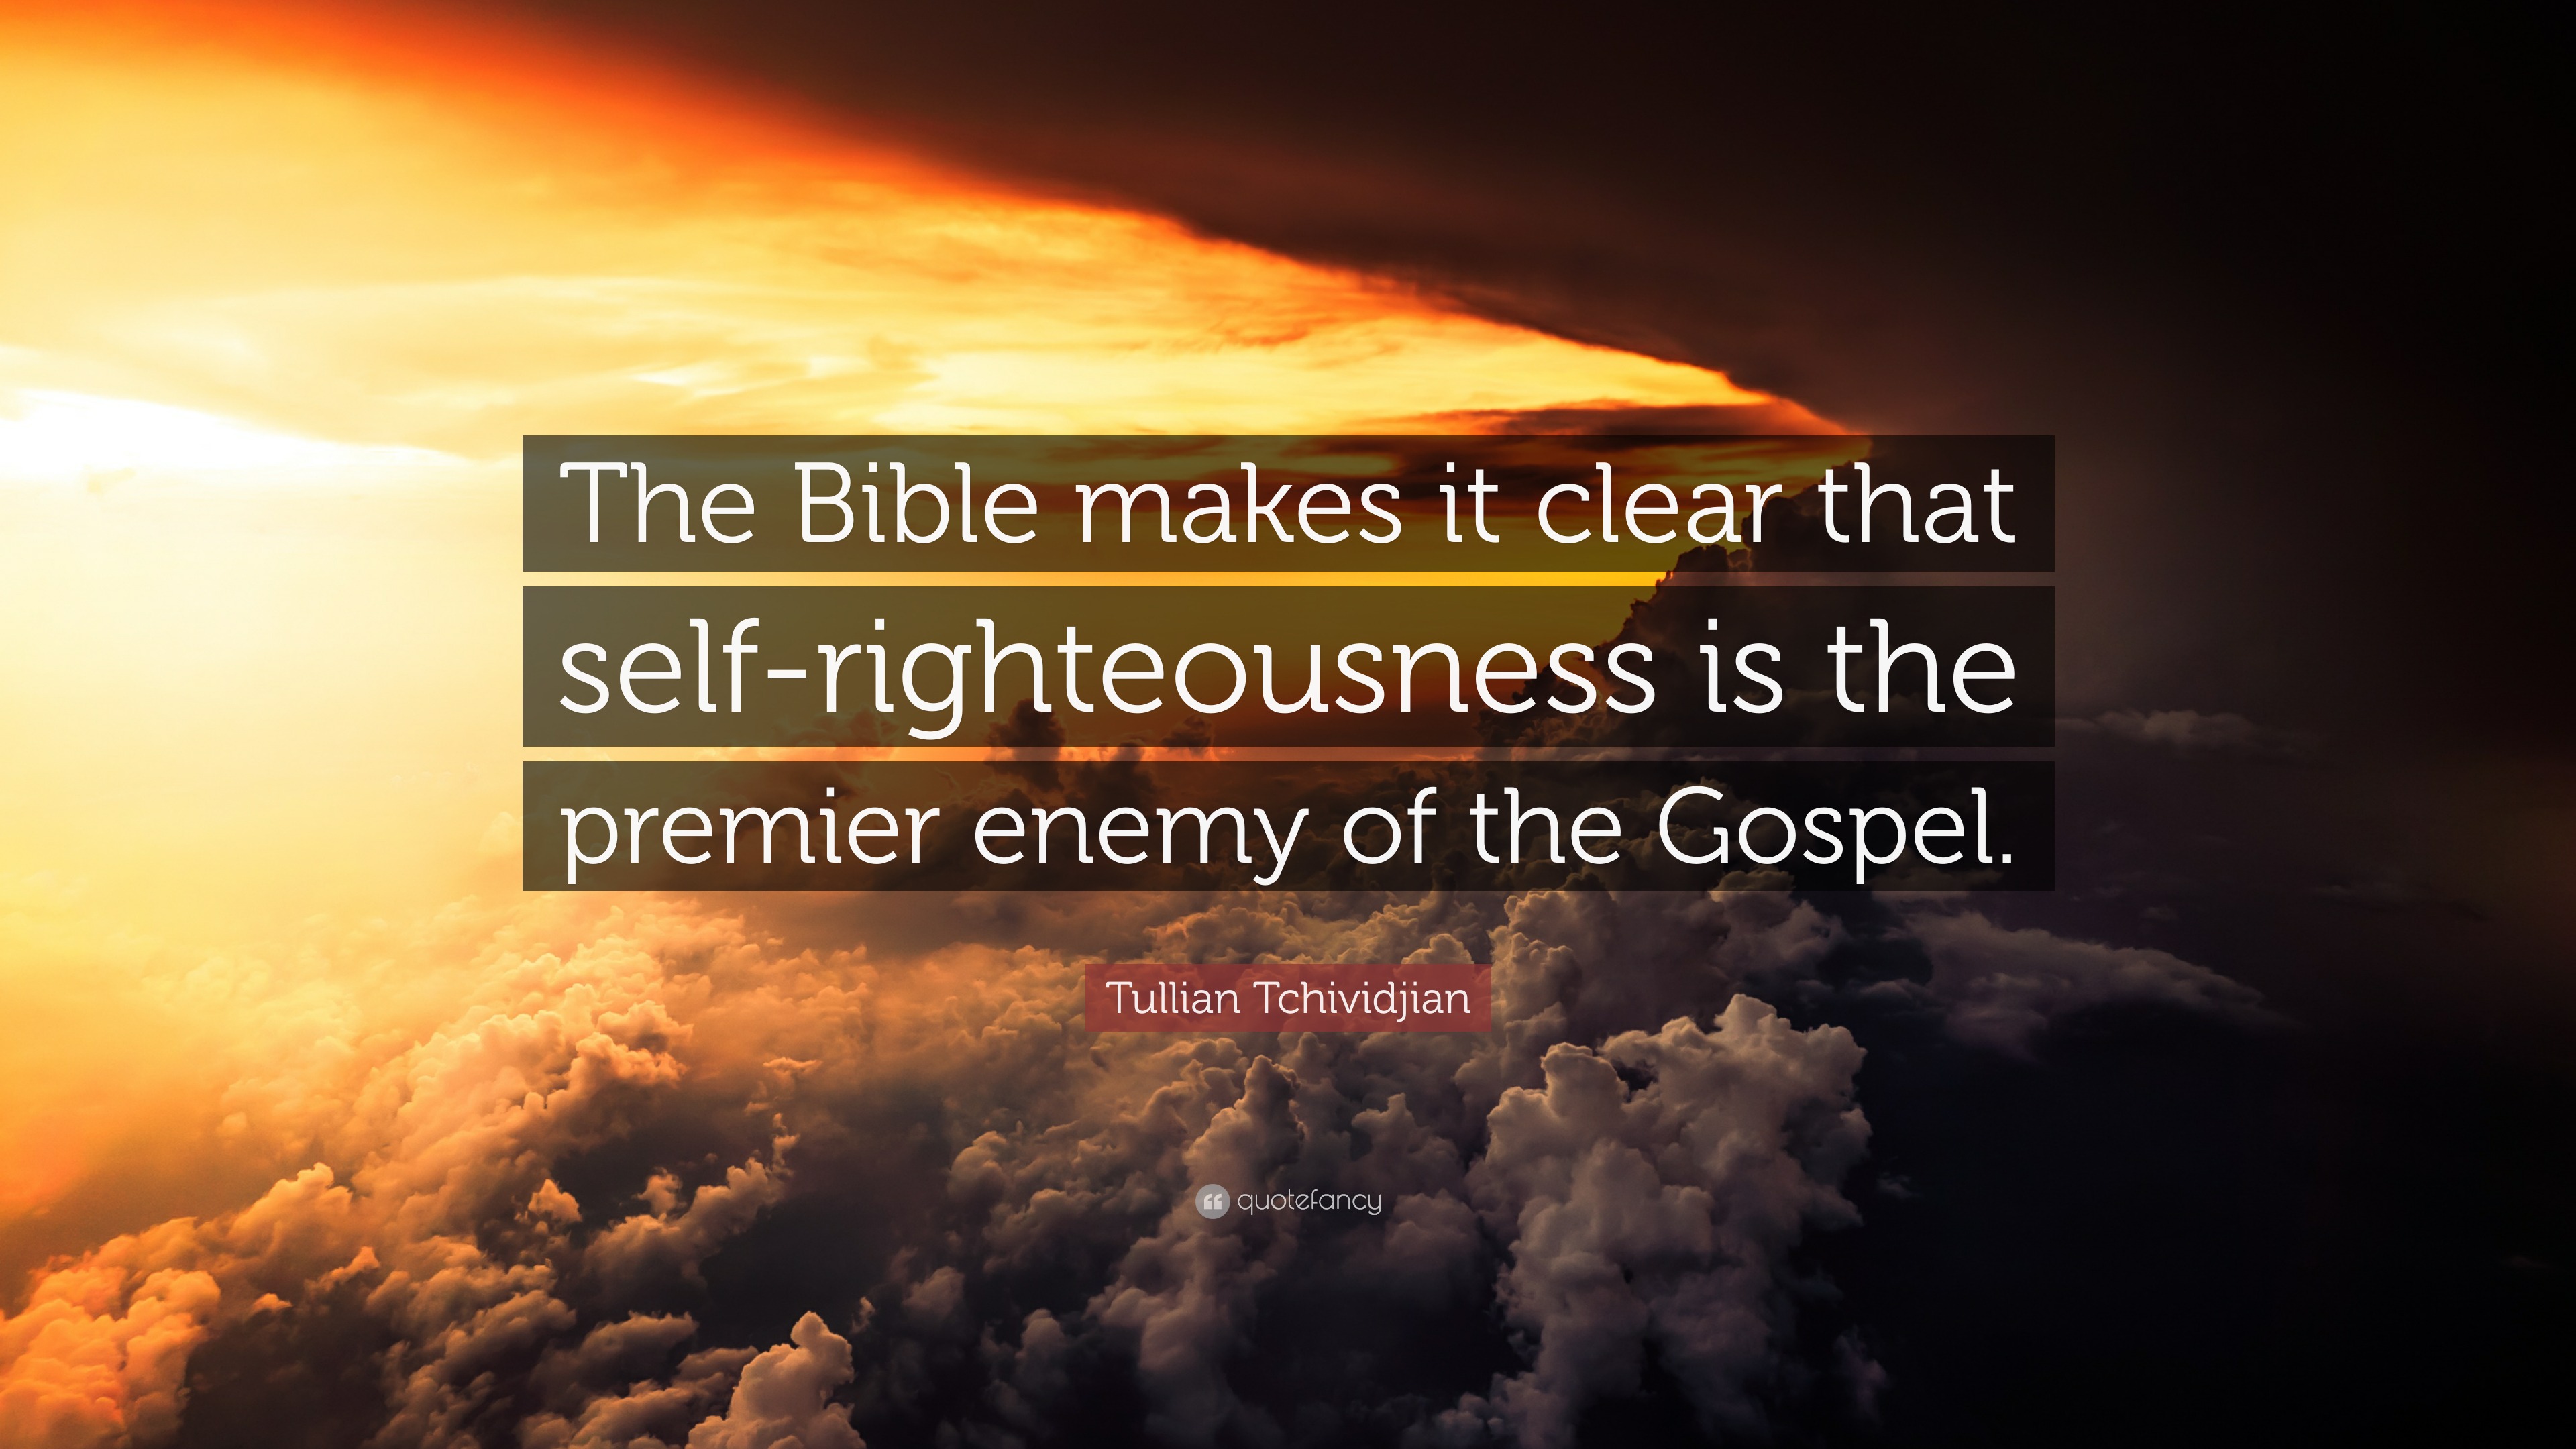 Tullian Tchividjian Quote: “The Bible makes it clear that self ...